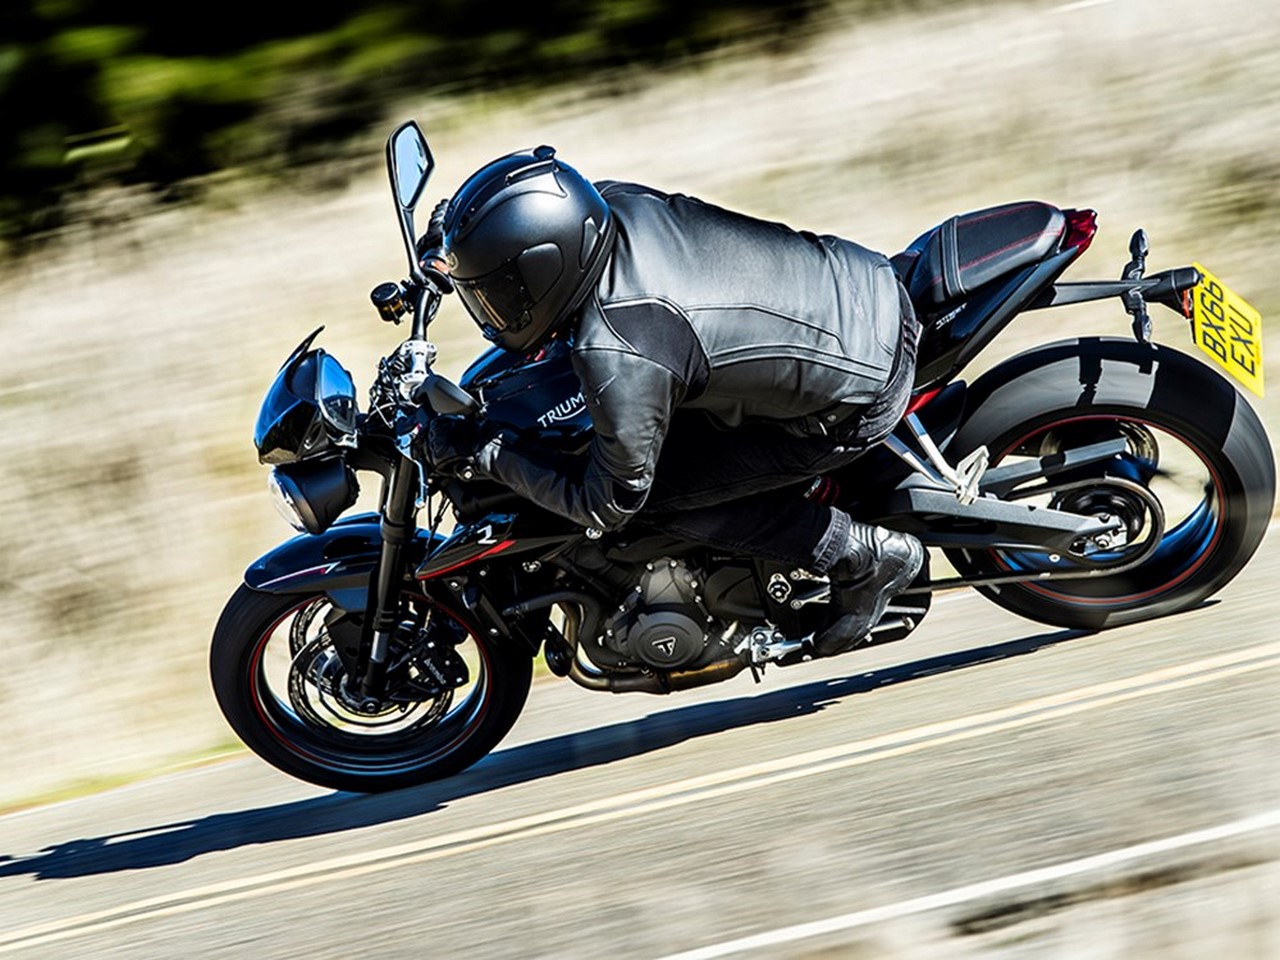 2020 Triumph Street Triple RS launched in India, priced at 